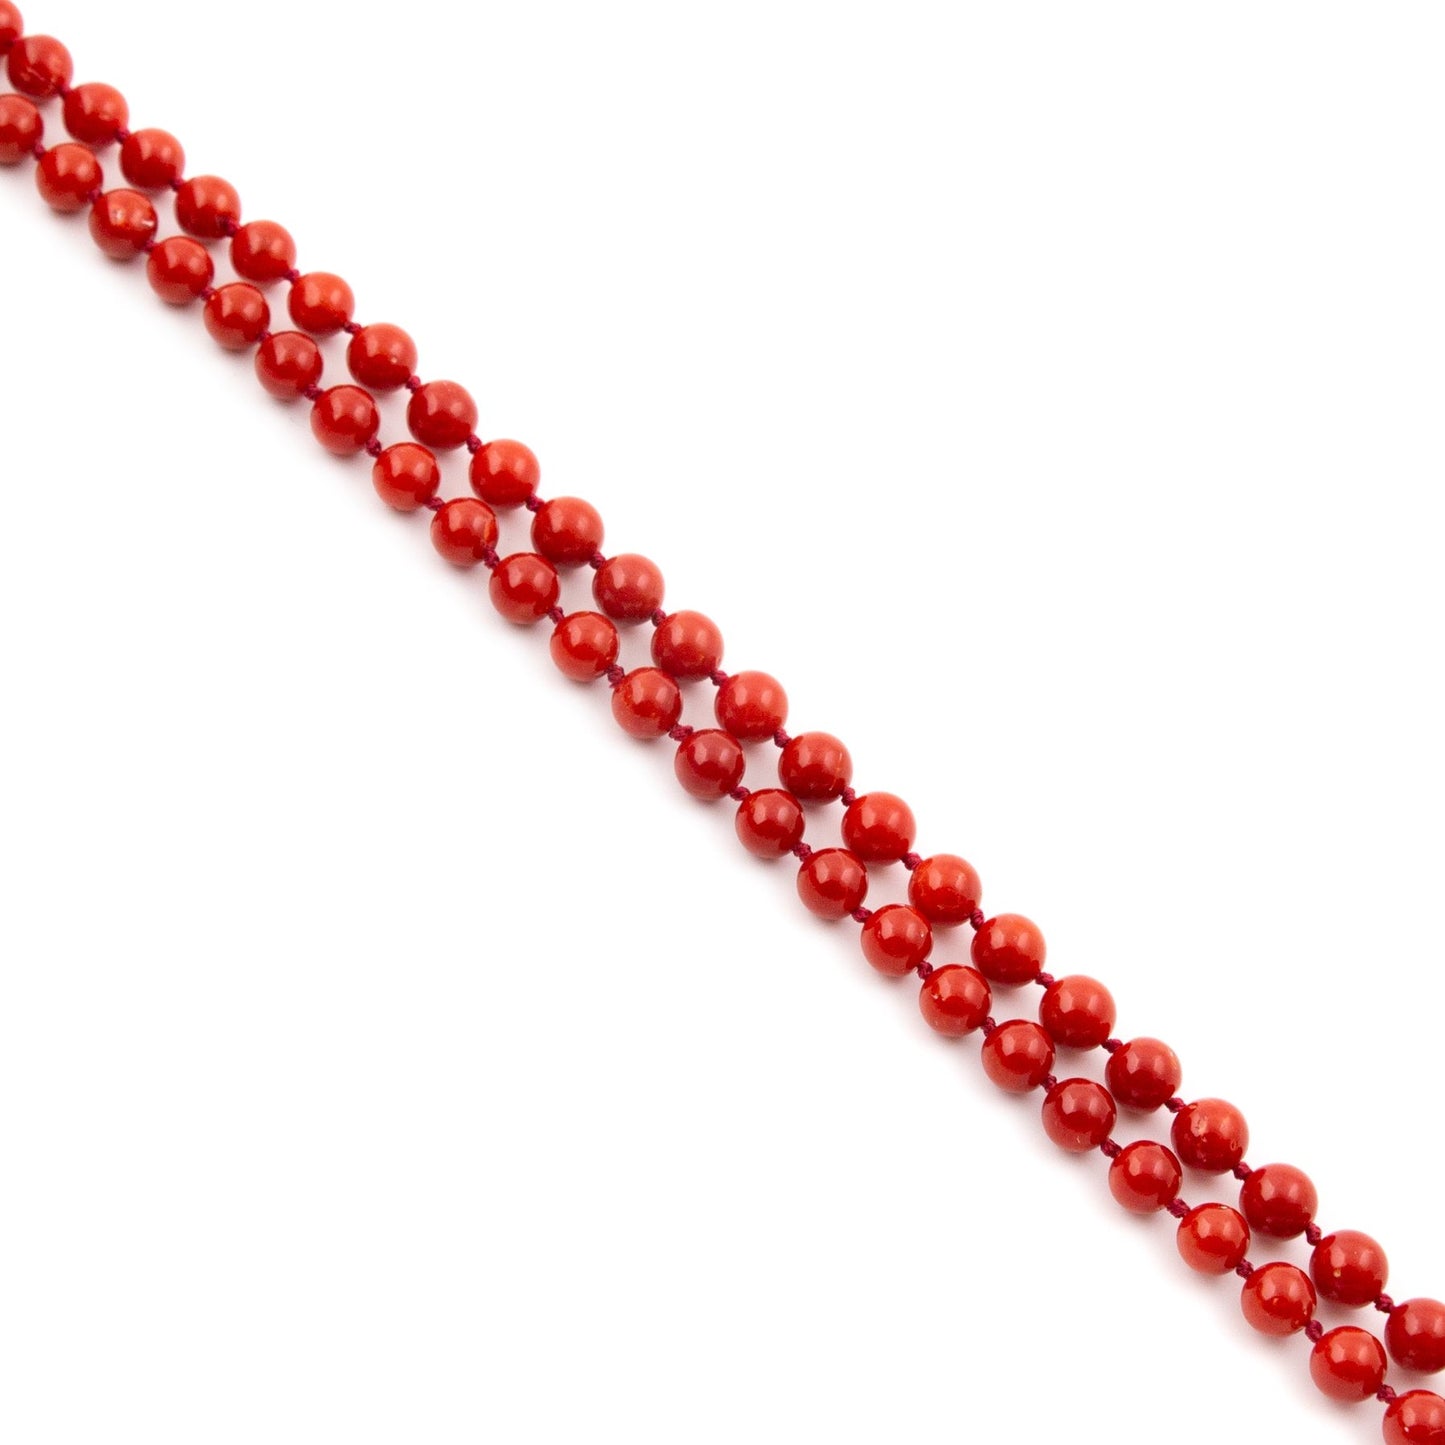 This exquisite antique beaded coral necklace is a timeless piece of jewelry that is sure to become your favourite accessory. Strung by hand, the necklace features a string of vibrant coral beads with a 10-carat gold clasp, creating a stunning combination of classic beauty and modern elegance